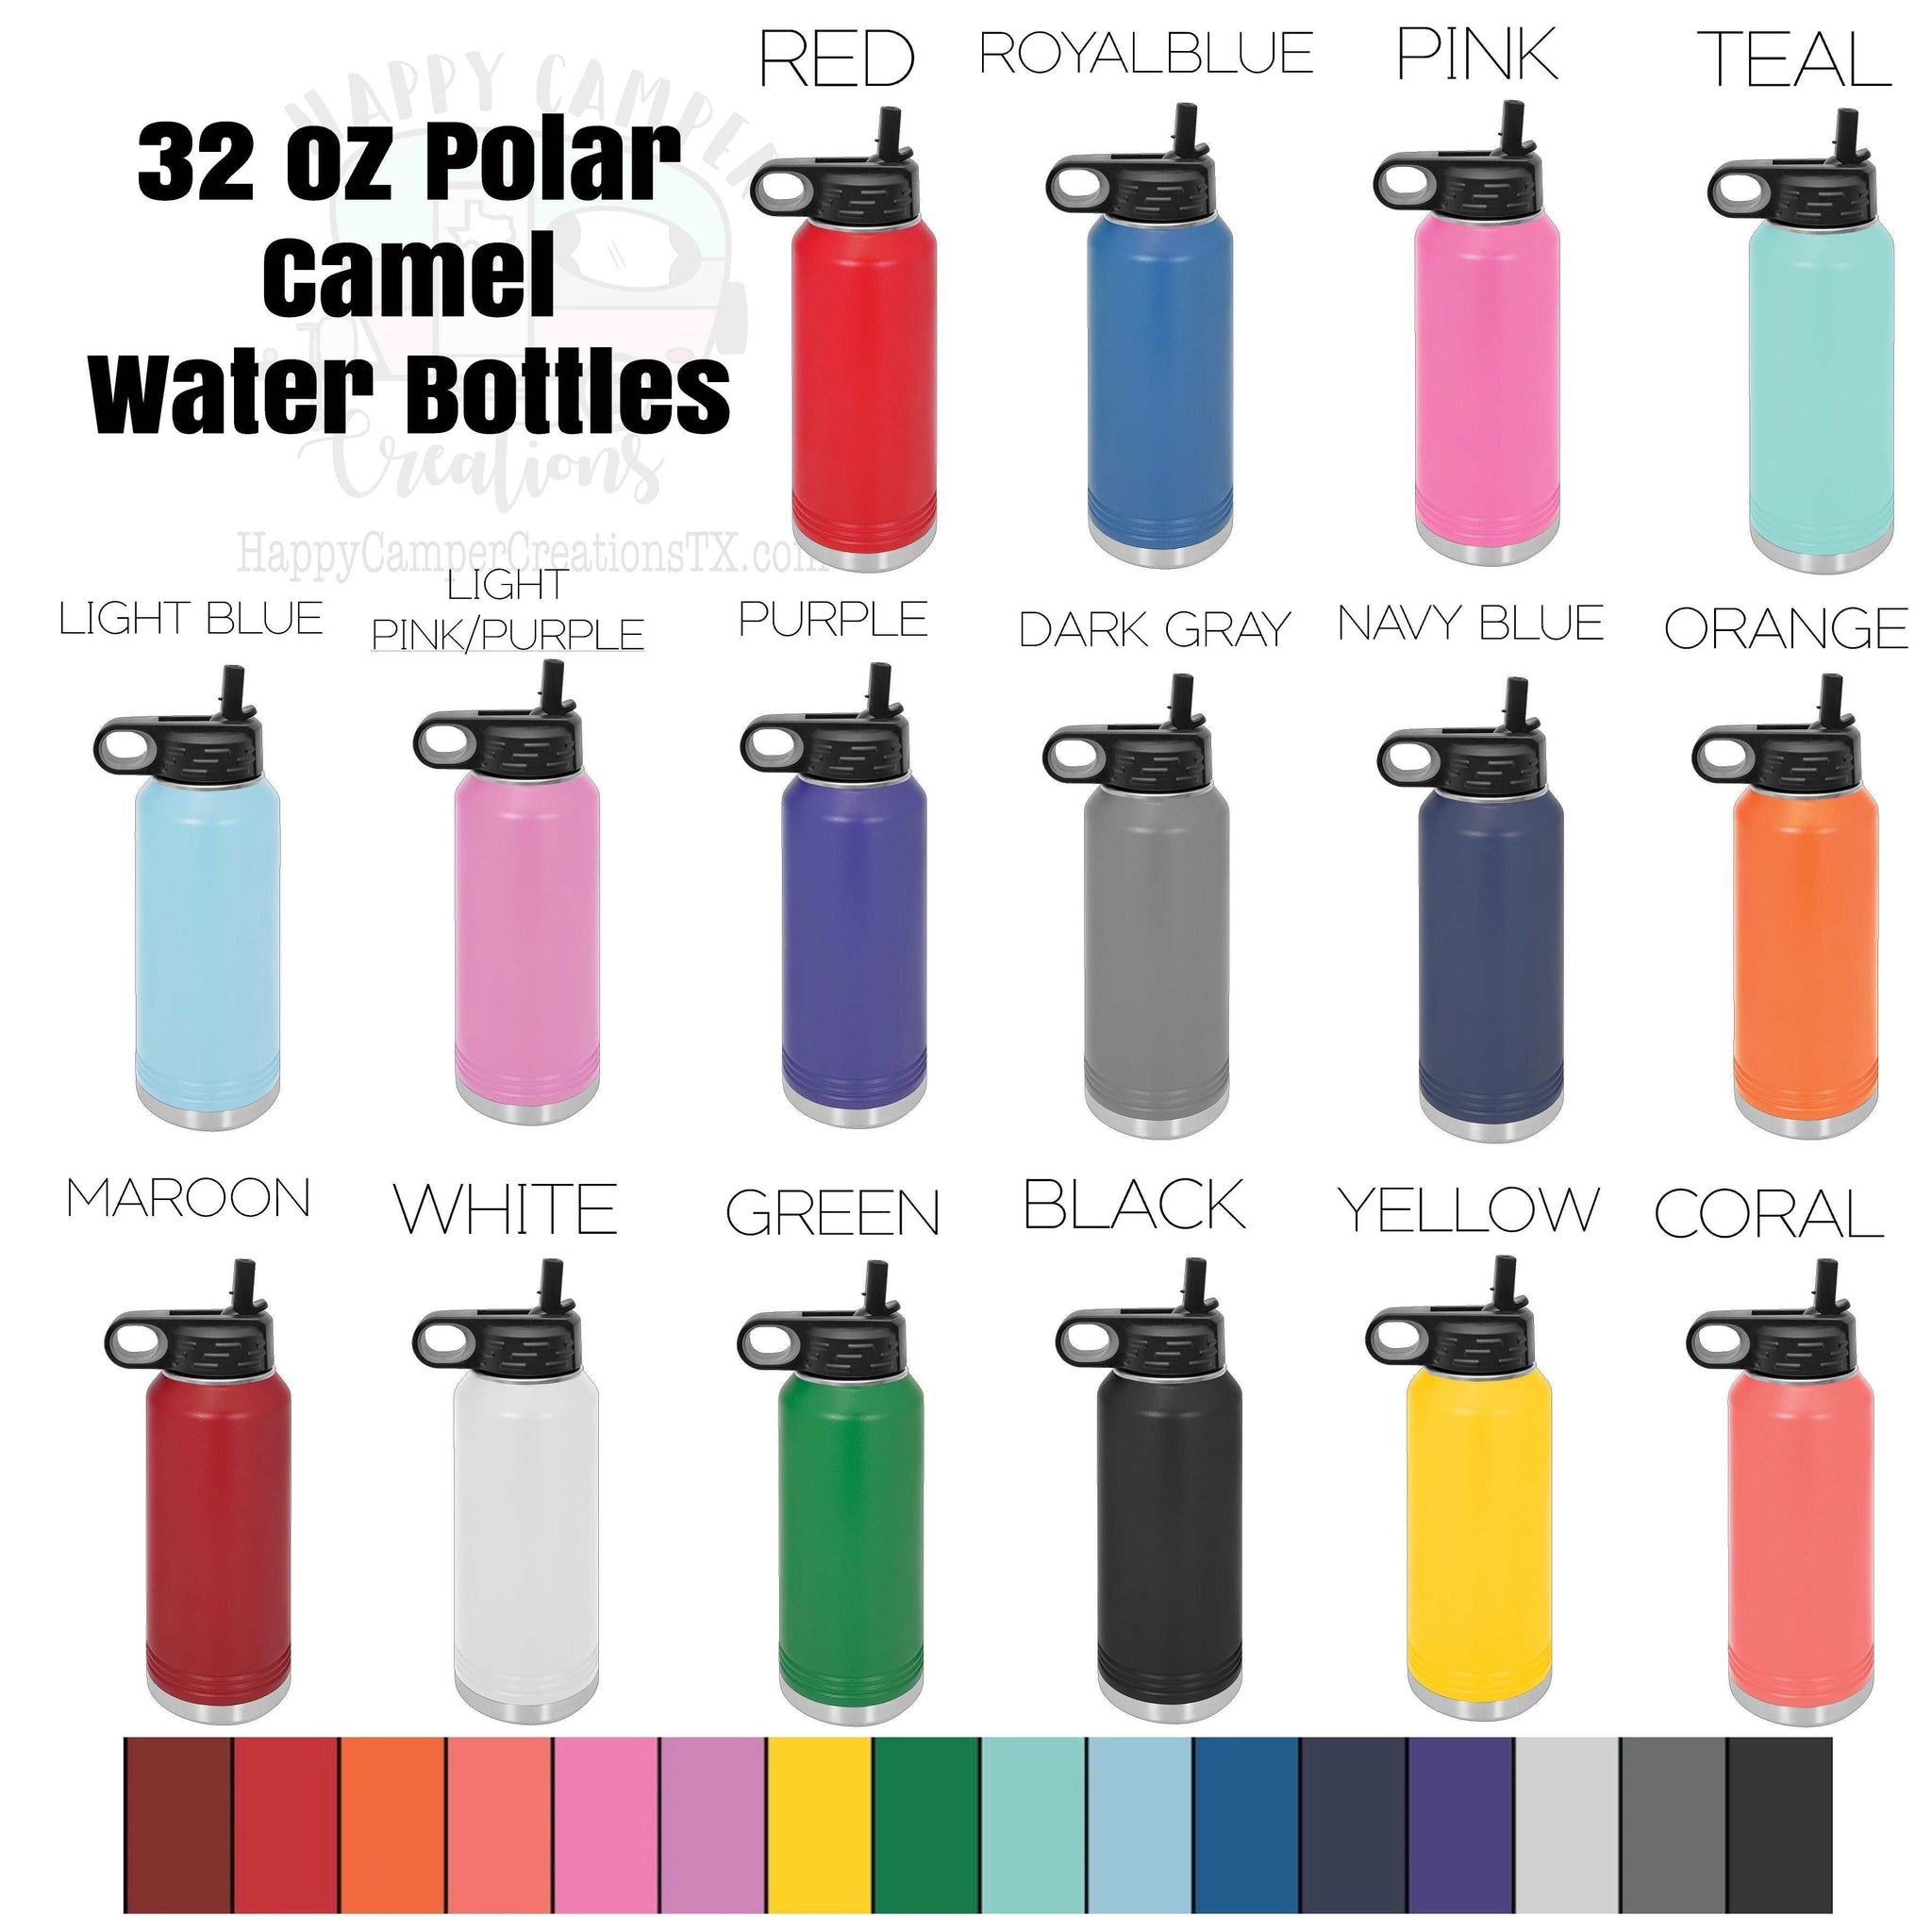 Personalized Personalized Polar Camel 32 oz Water Bottle with